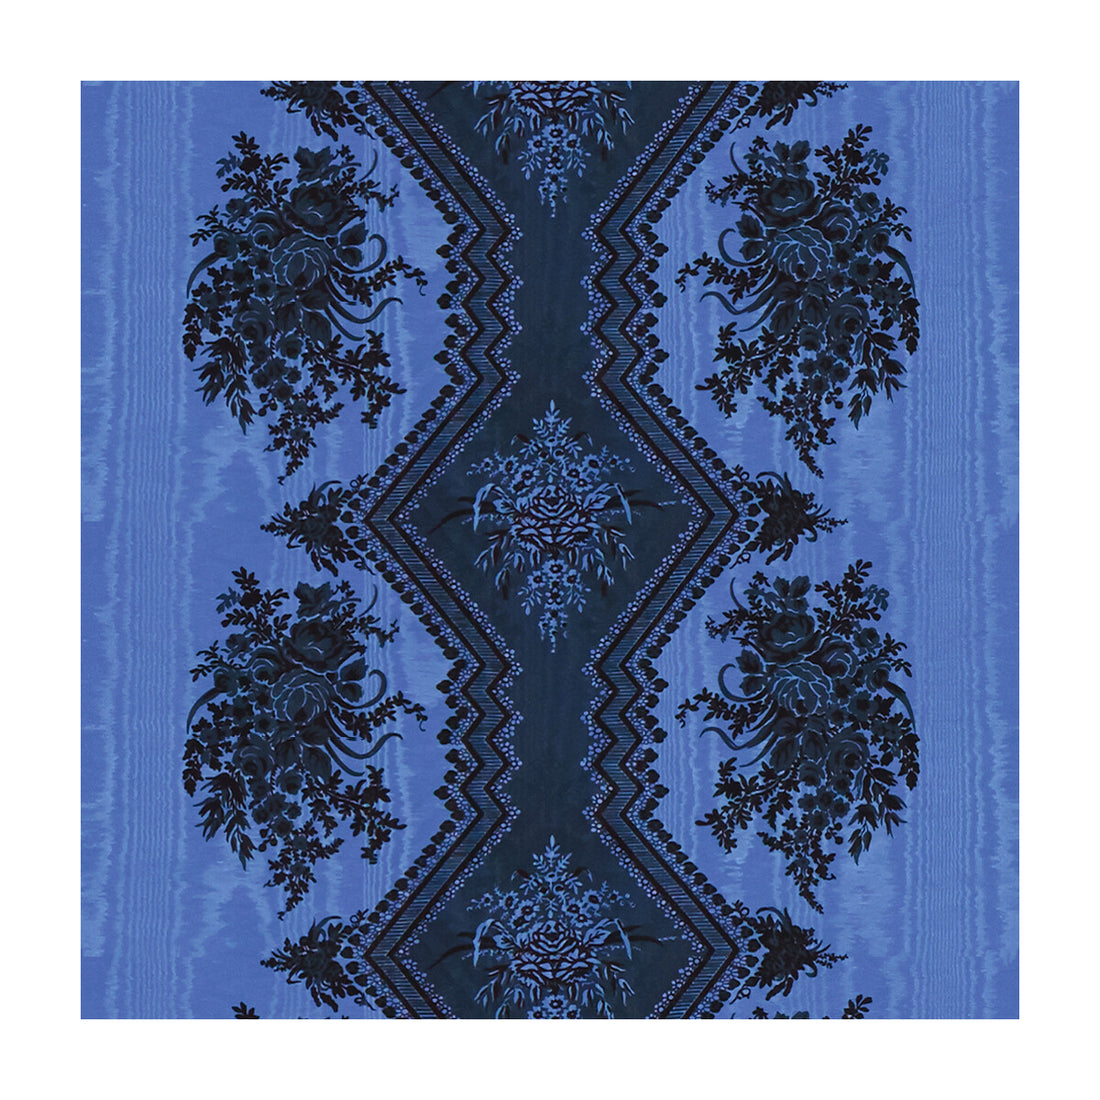 Coppelia Moire fabric in bleu color - pattern 8015137.5.0 - by Brunschwig &amp; Fils in the Madeleine Castaing collection